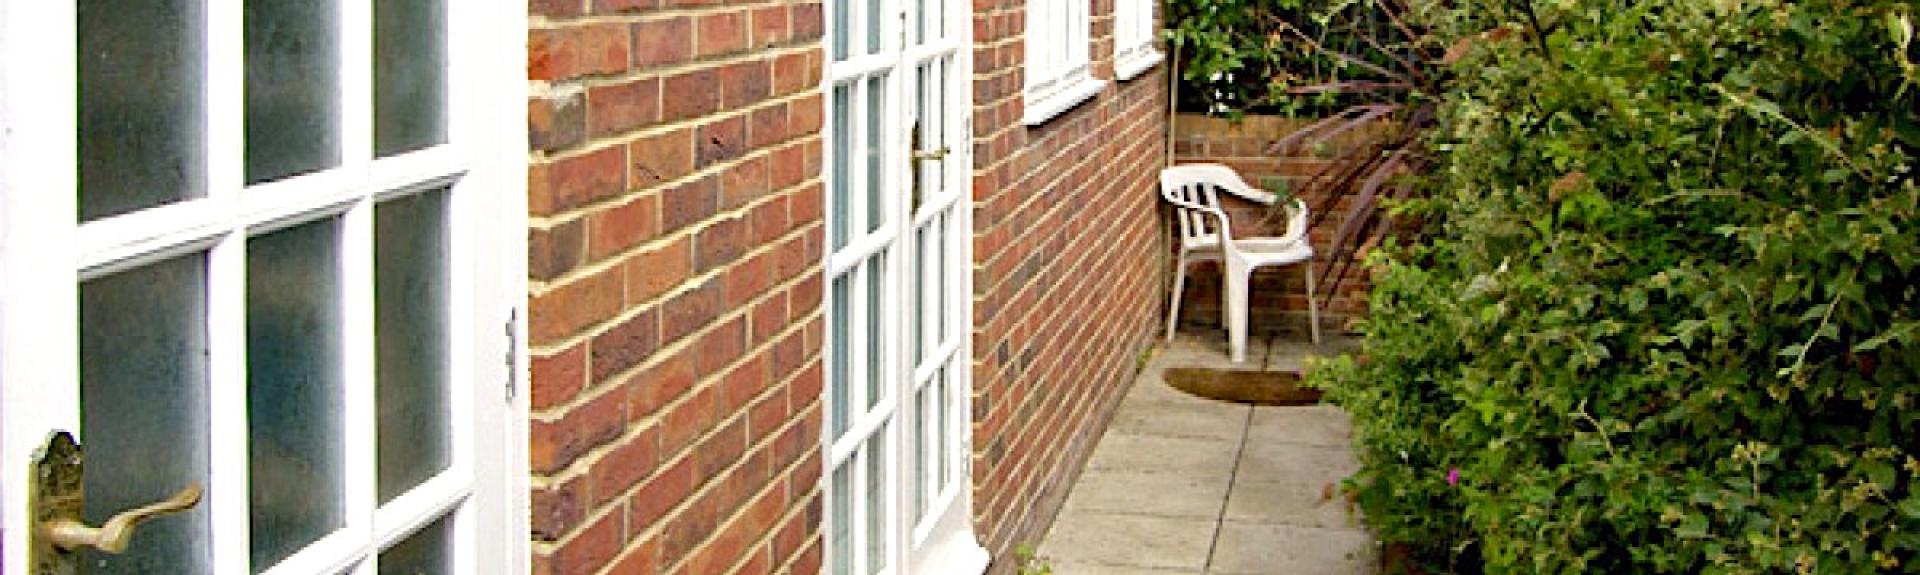 A paved path leads to the side entrance of a brick built, Isle-of-Wight holiday cottage 